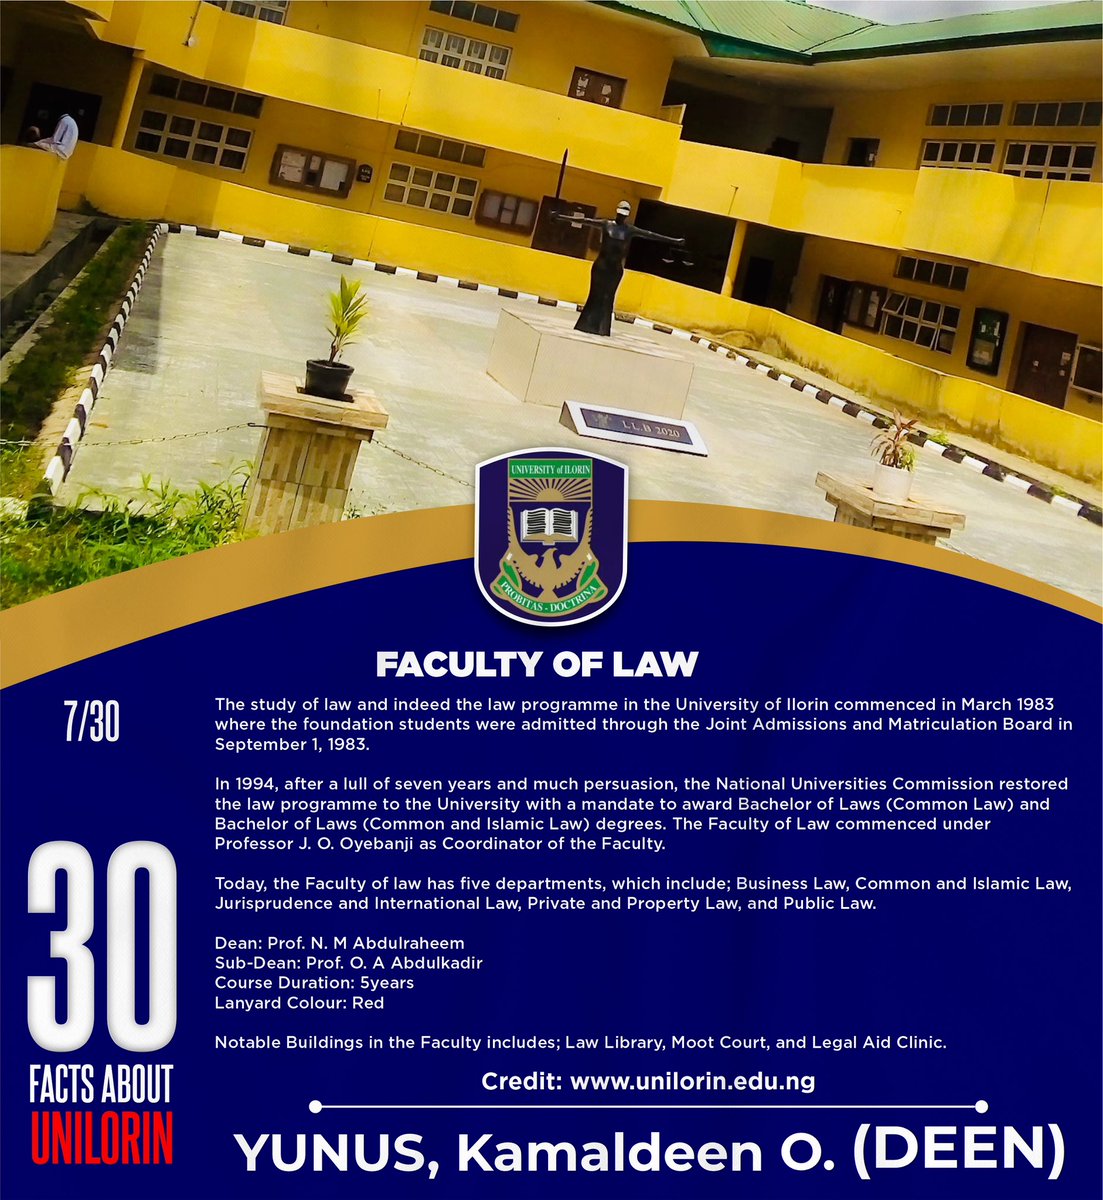 🔥MUST READ

30 FACTS ABOUT UNILORIN🎓

7/30 — FACULTY OF LAW